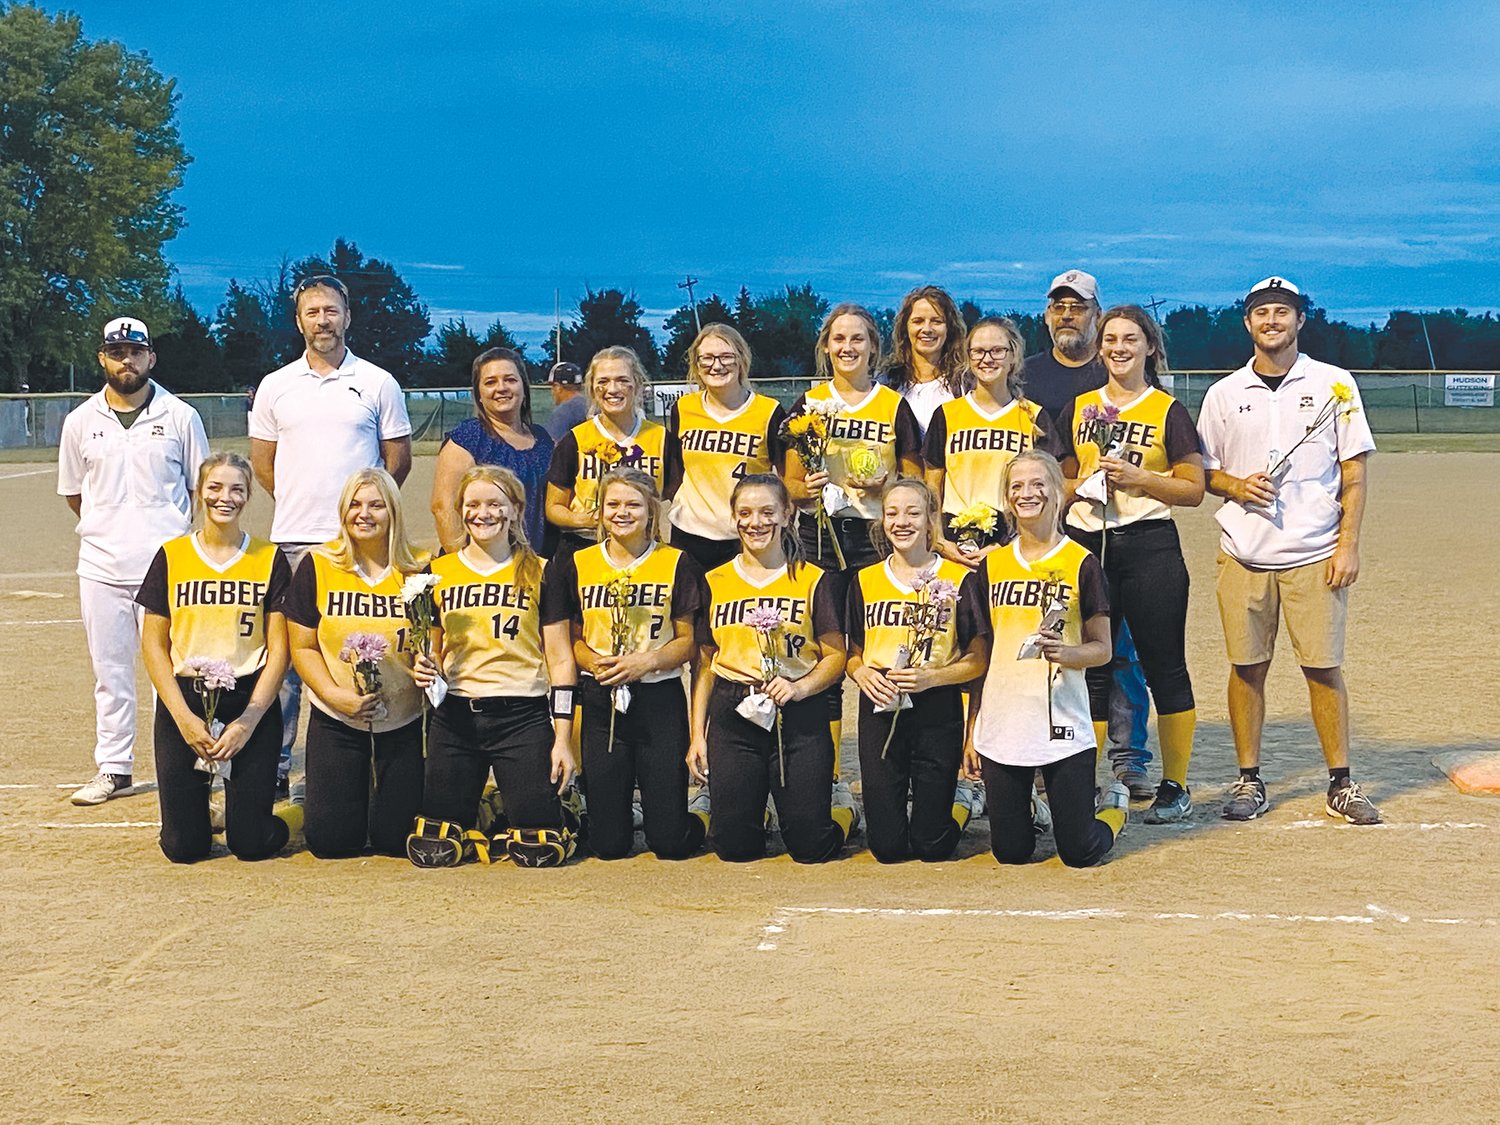 Seniors on the Higbee softball team were recognized at last Thursday’s home game against Jamestown. The Lady Tigers fell 16-4 to Jamestown.